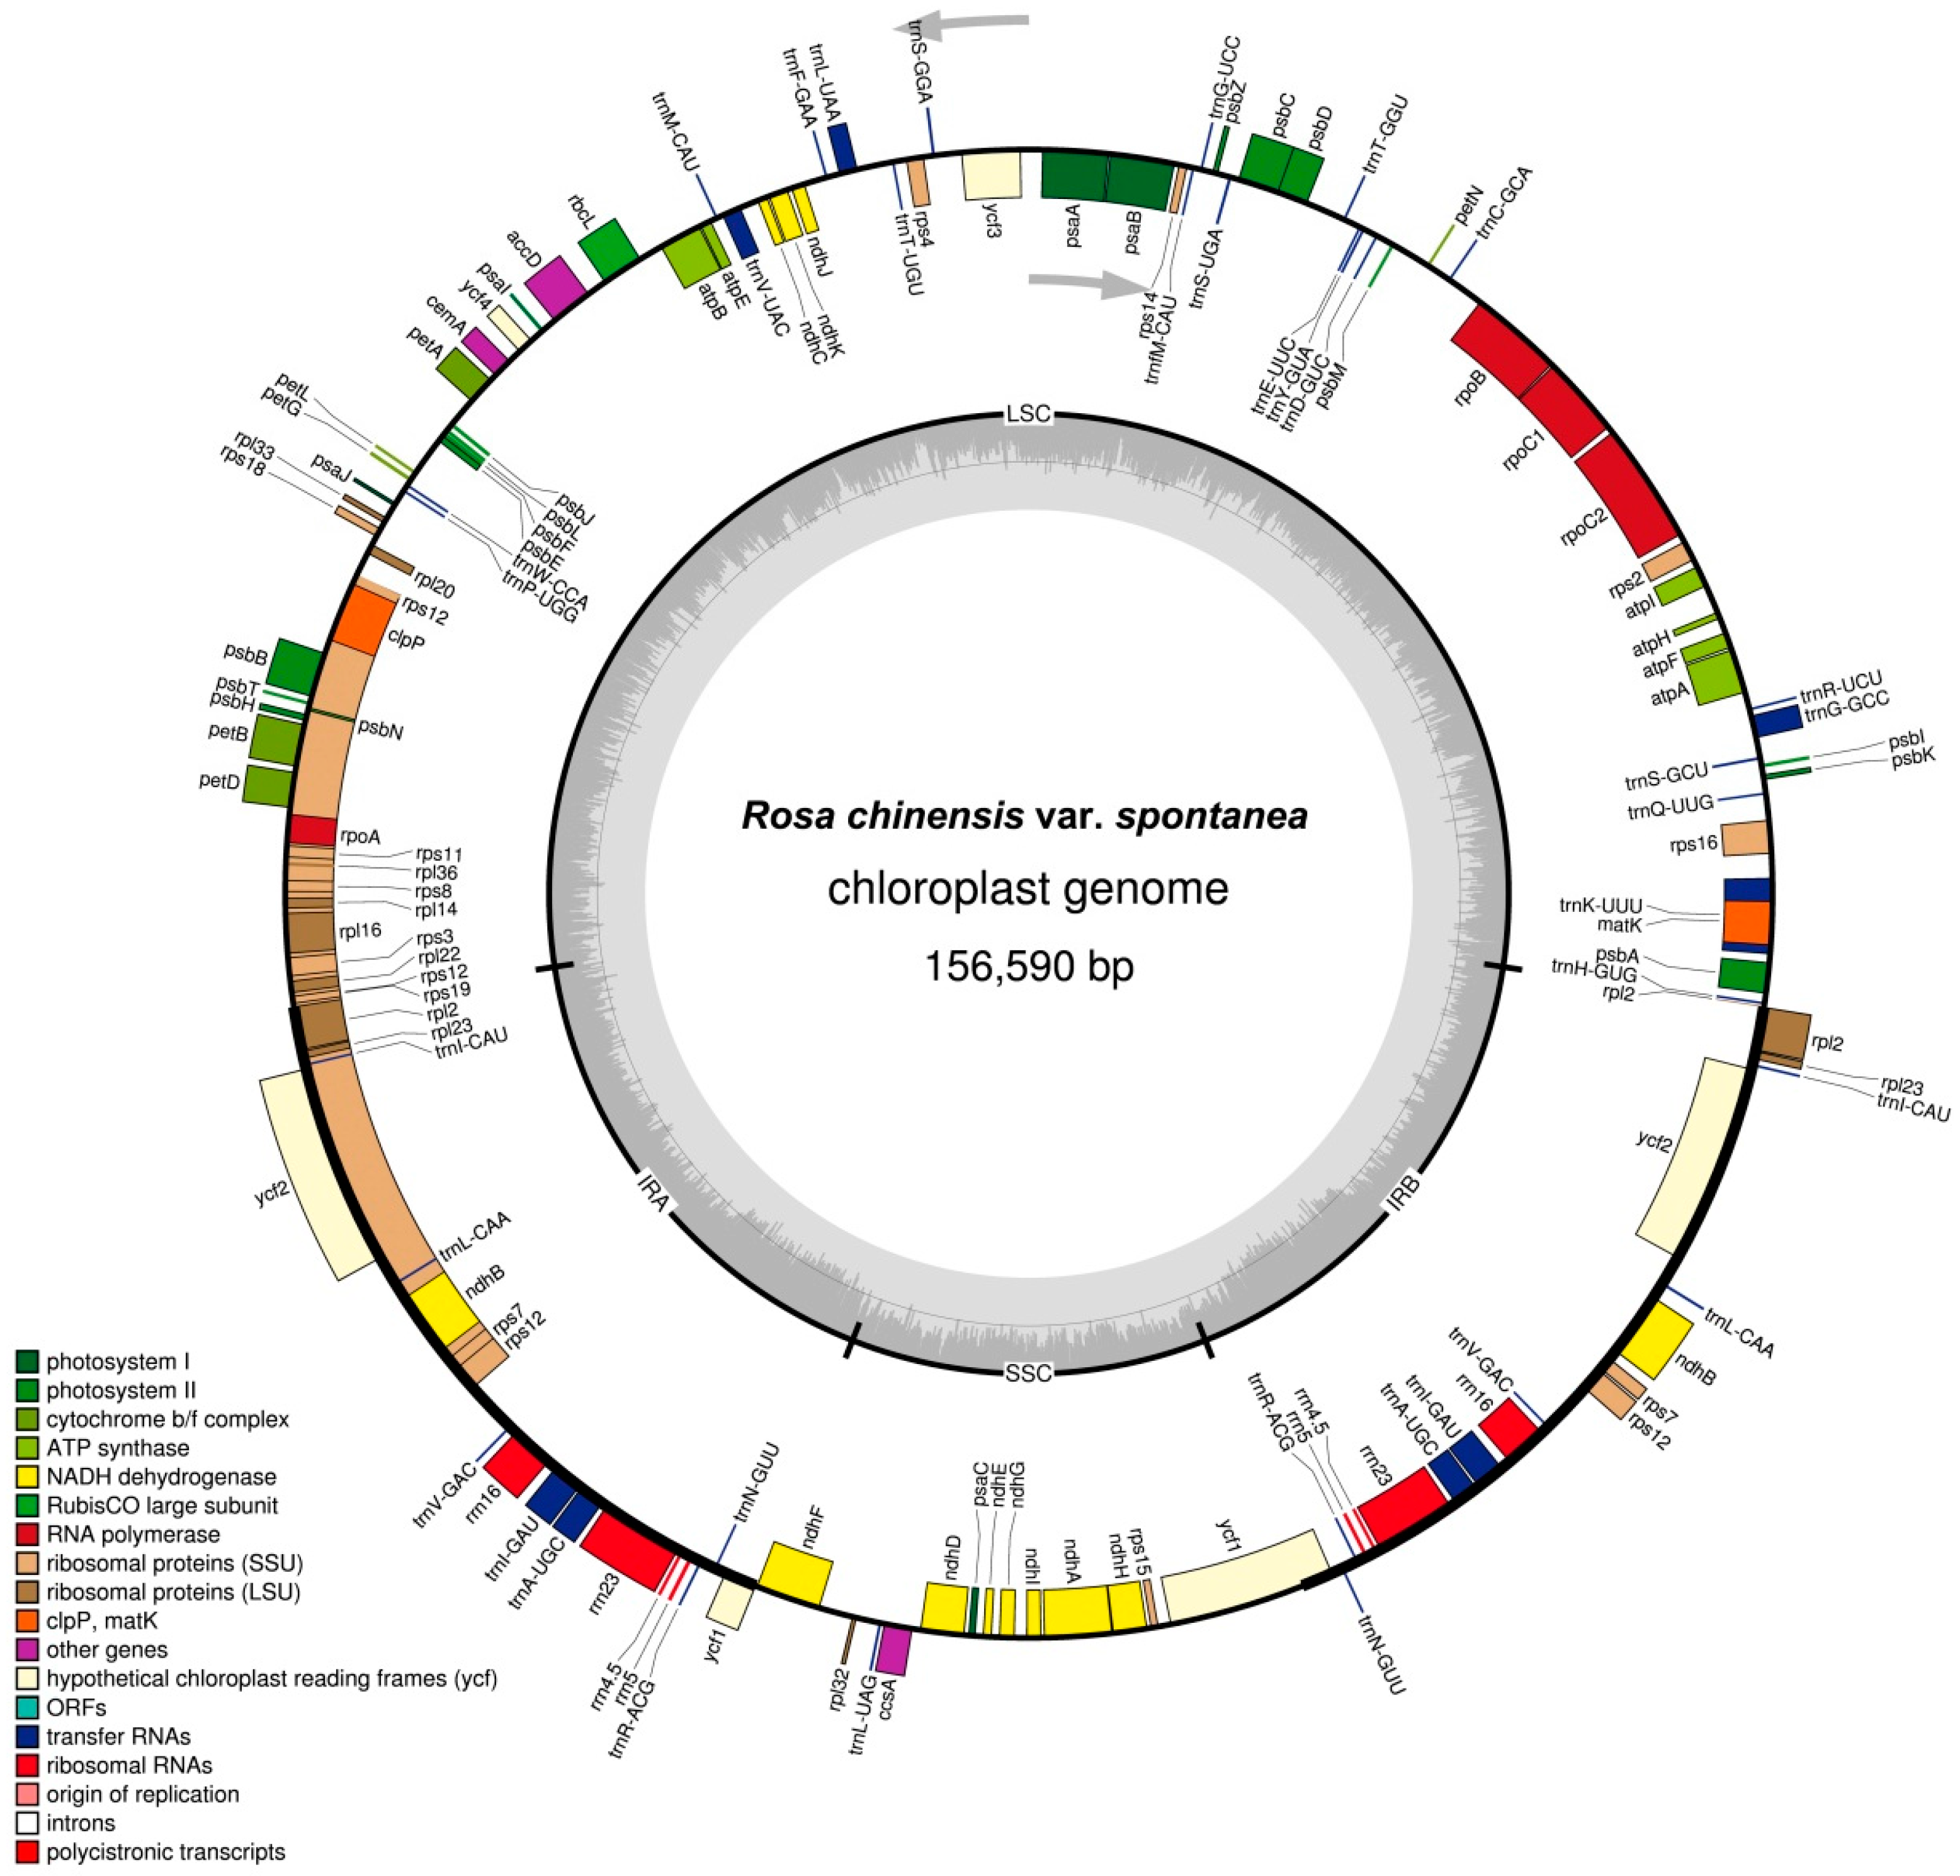 Molecules | Free Full-Text | The Complete Chloroplast Genome of a 